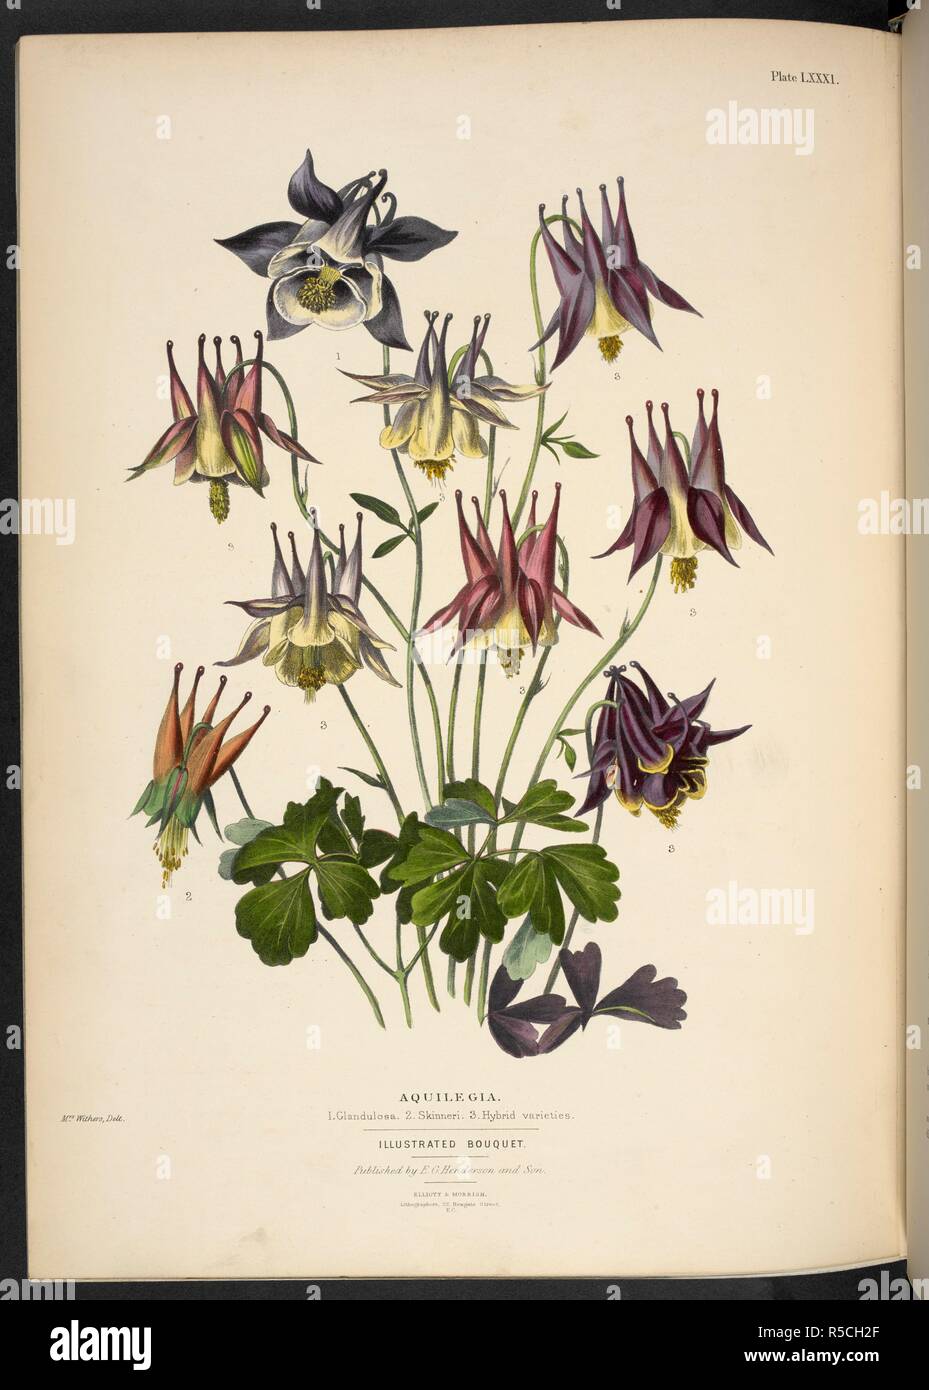 New aquilegias. Aquilegia. 1. Glandulosa; 2. Skinneri; 3. Hybrid varieties. The Illustrated Bouquet, consisting of figures, with descriptions of new flowers. London, 1857-64. Source: 1823.c.13 plate 81. Author: Henderson, Edward George. Withers, Mrs. Stock Photo